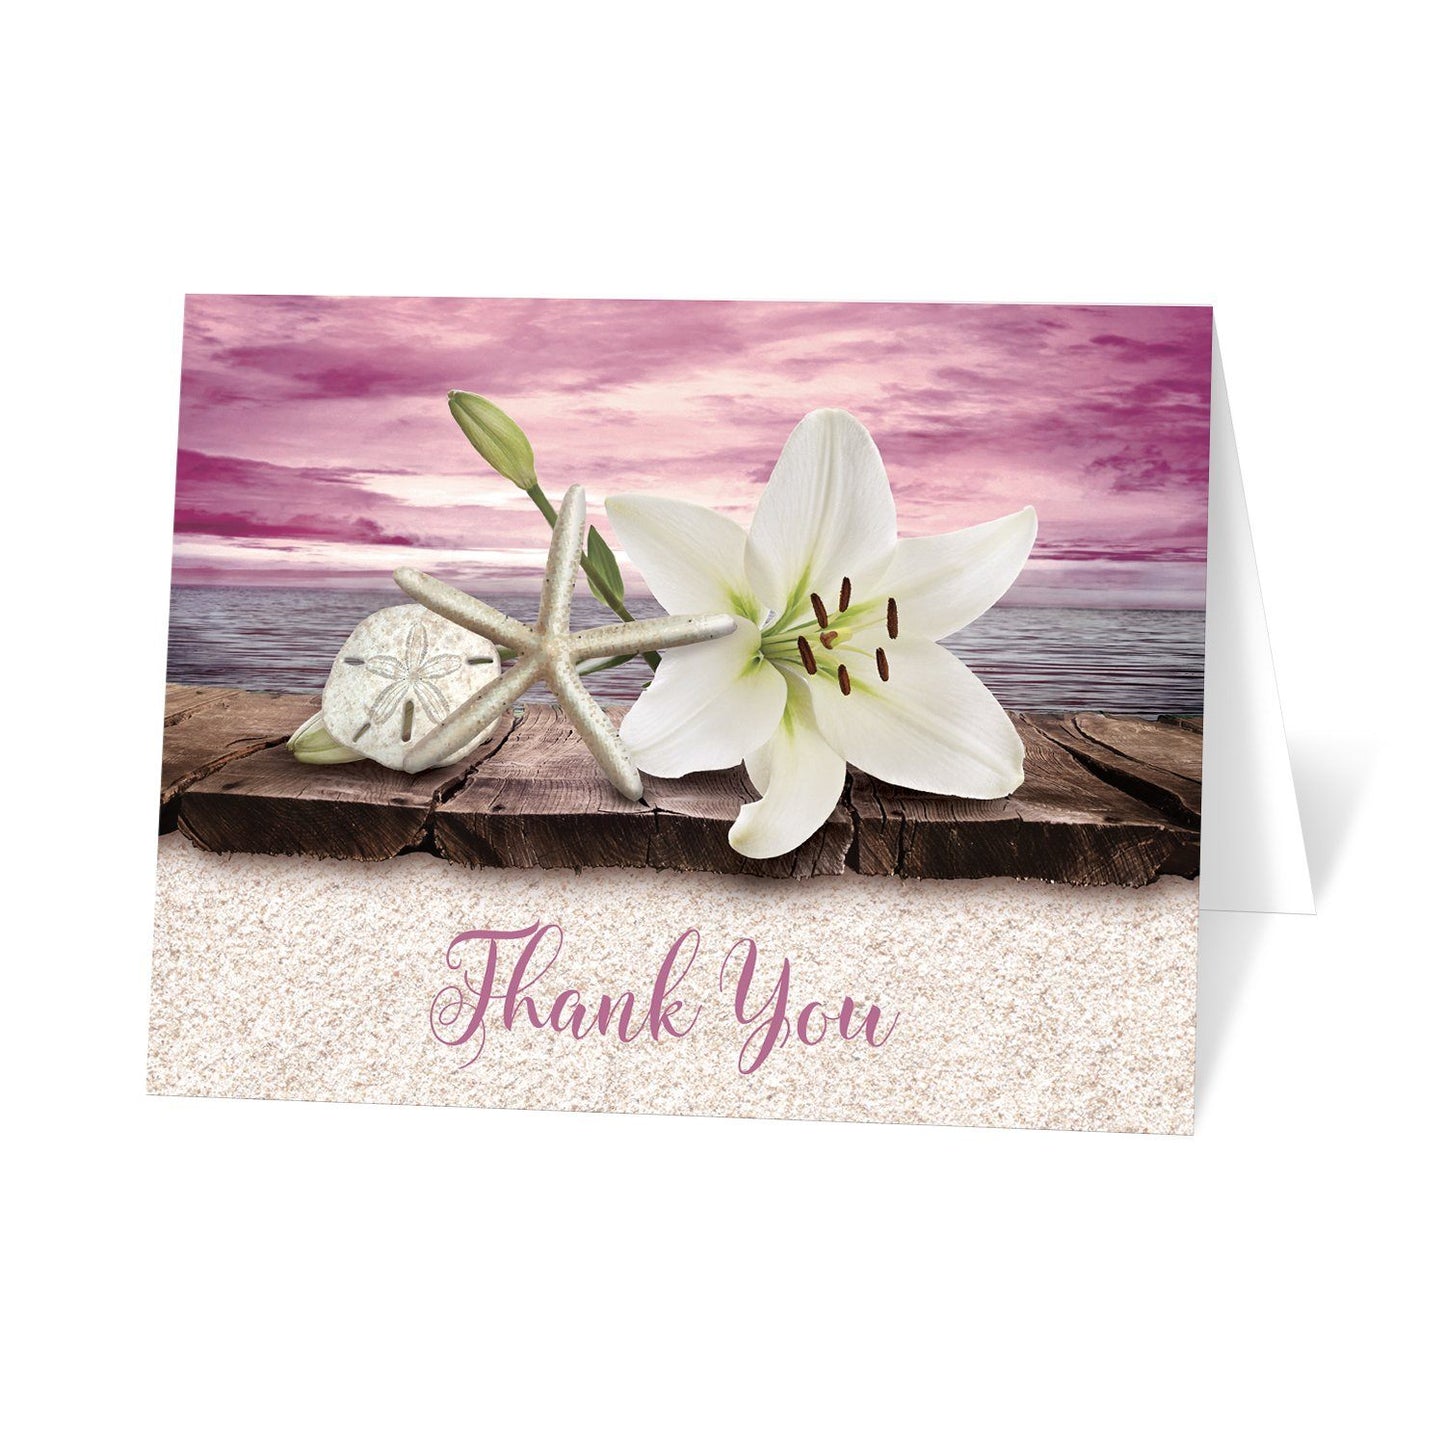 Lily Seashells Sand Magenta Beach Thank You Cards at Artistically Invited